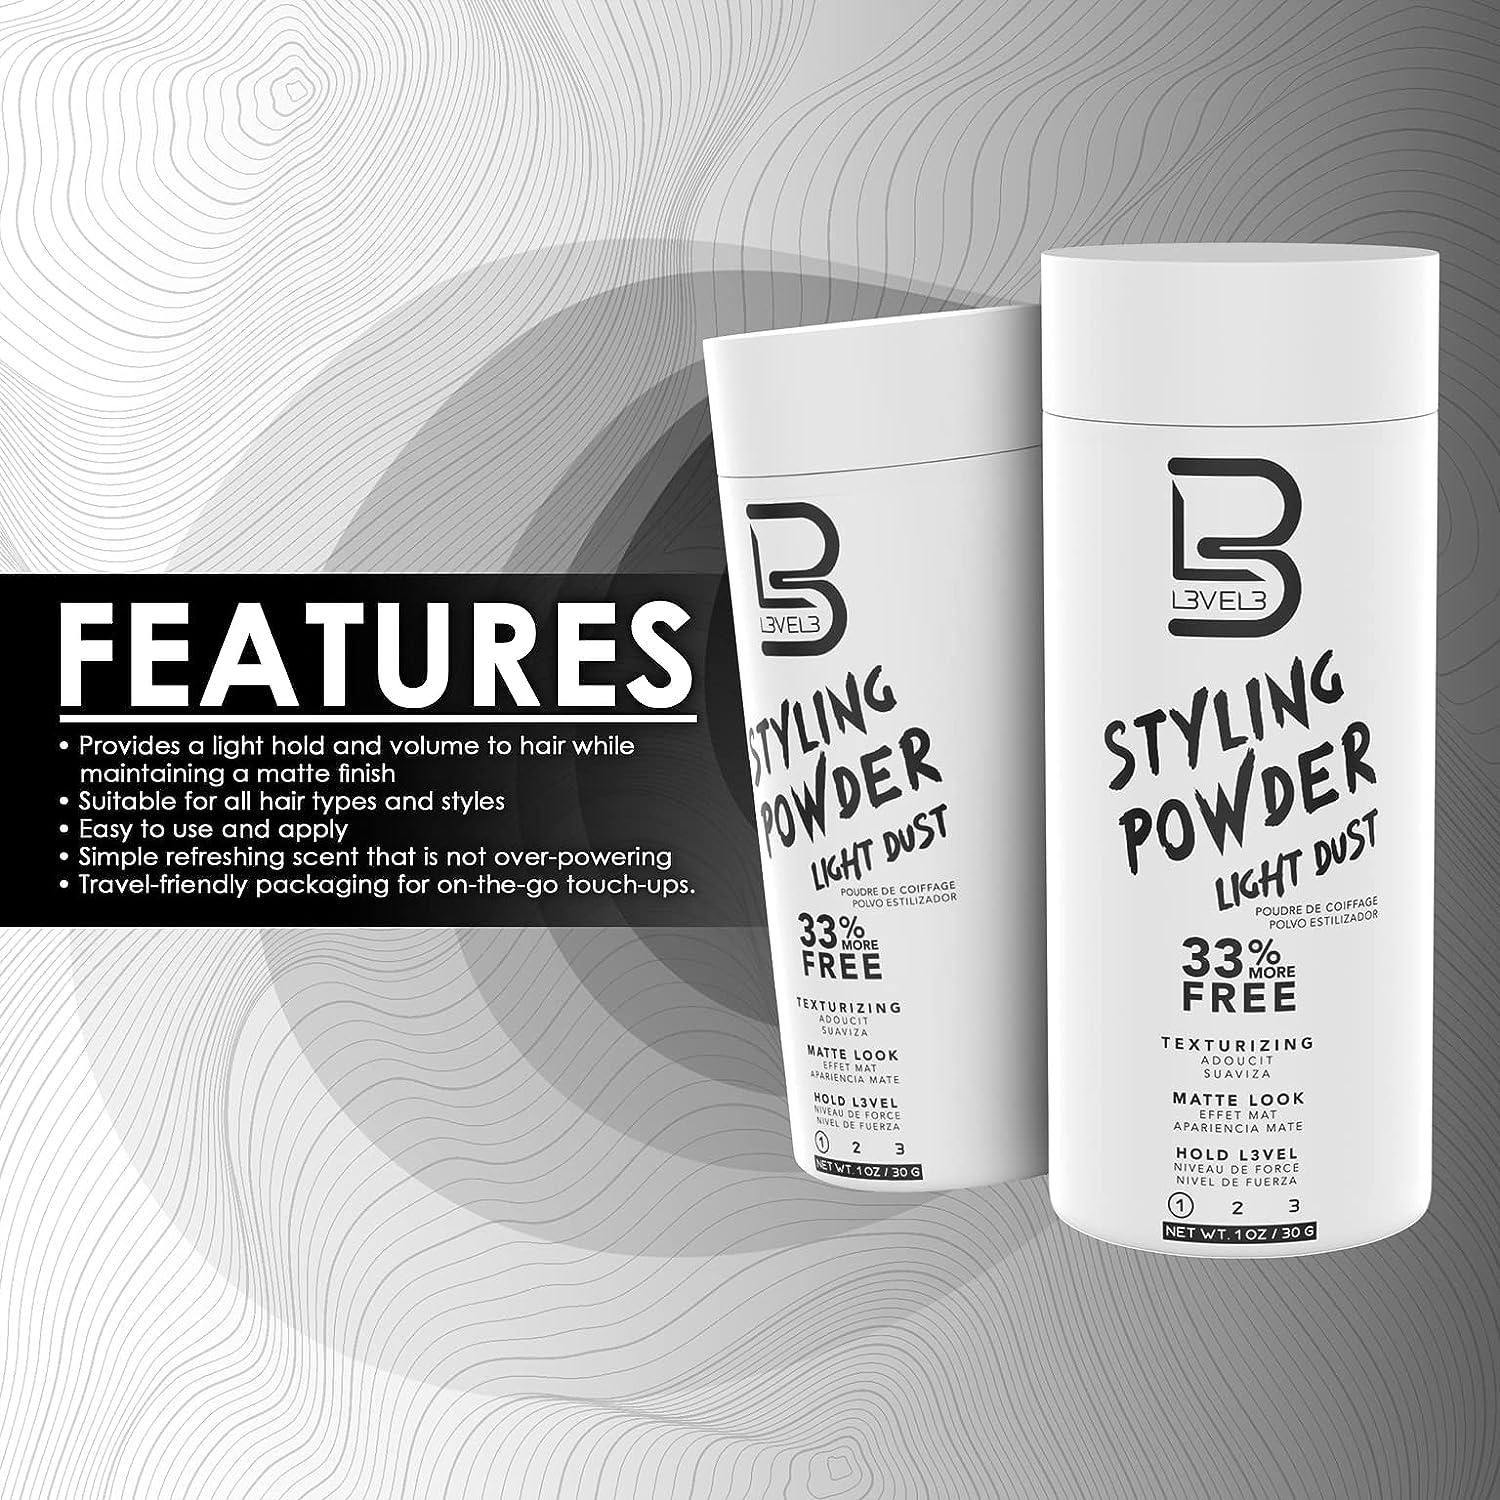  L3 Level 3 Travel Styling Powder - Small 0.18 oz for Travel -  Natural Look Mens Powder - Sample Styling Powder (Strong Hold-3Pack) :  Beauty & Personal Care